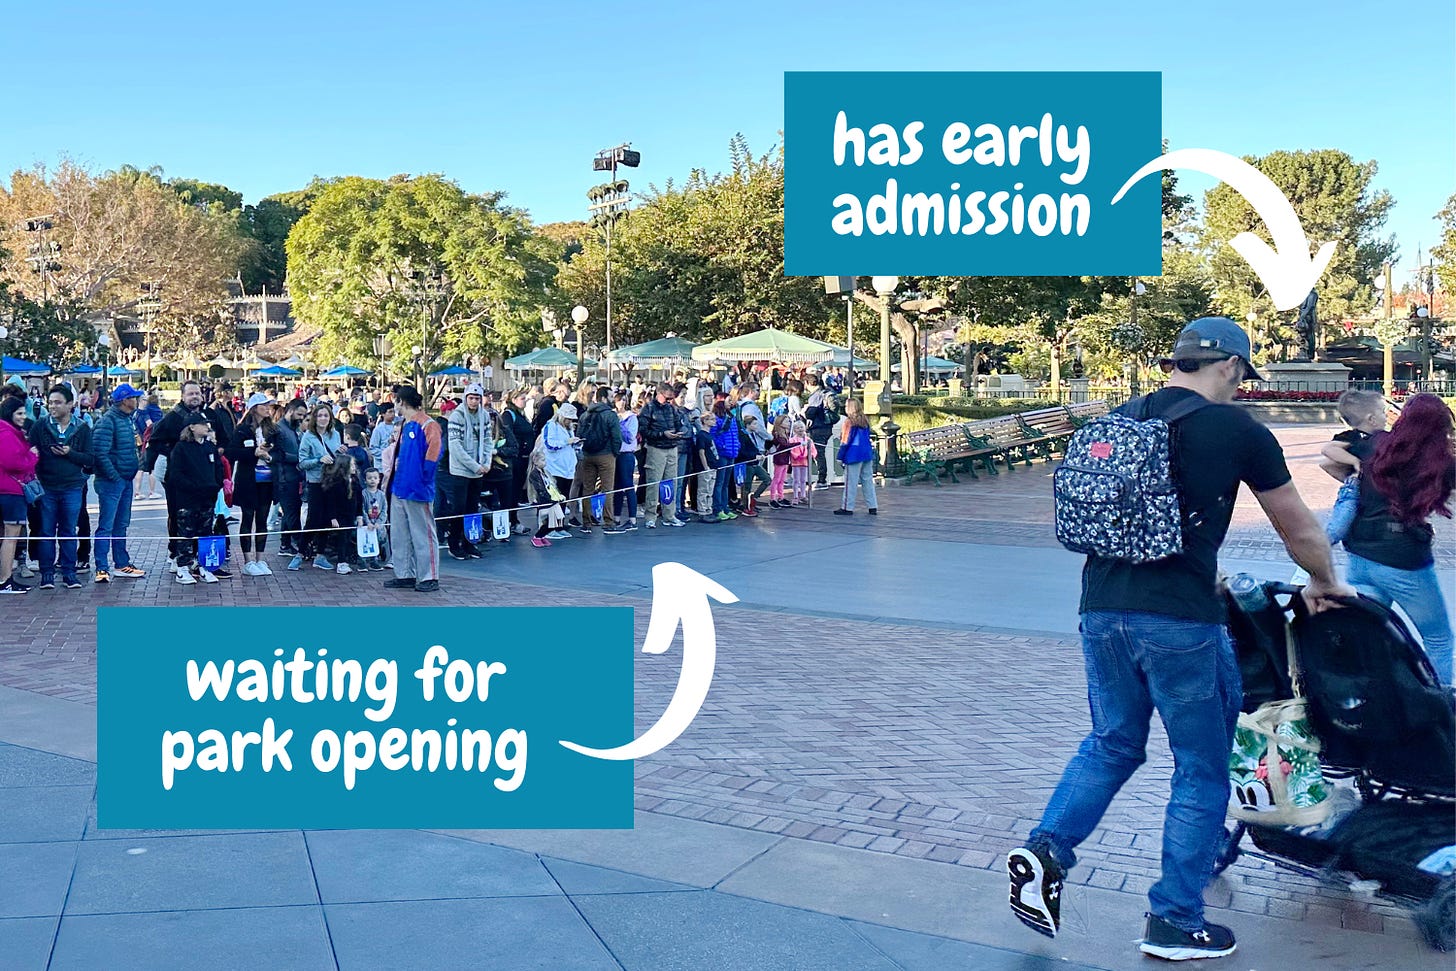 Early admission rope drop at Disneyland